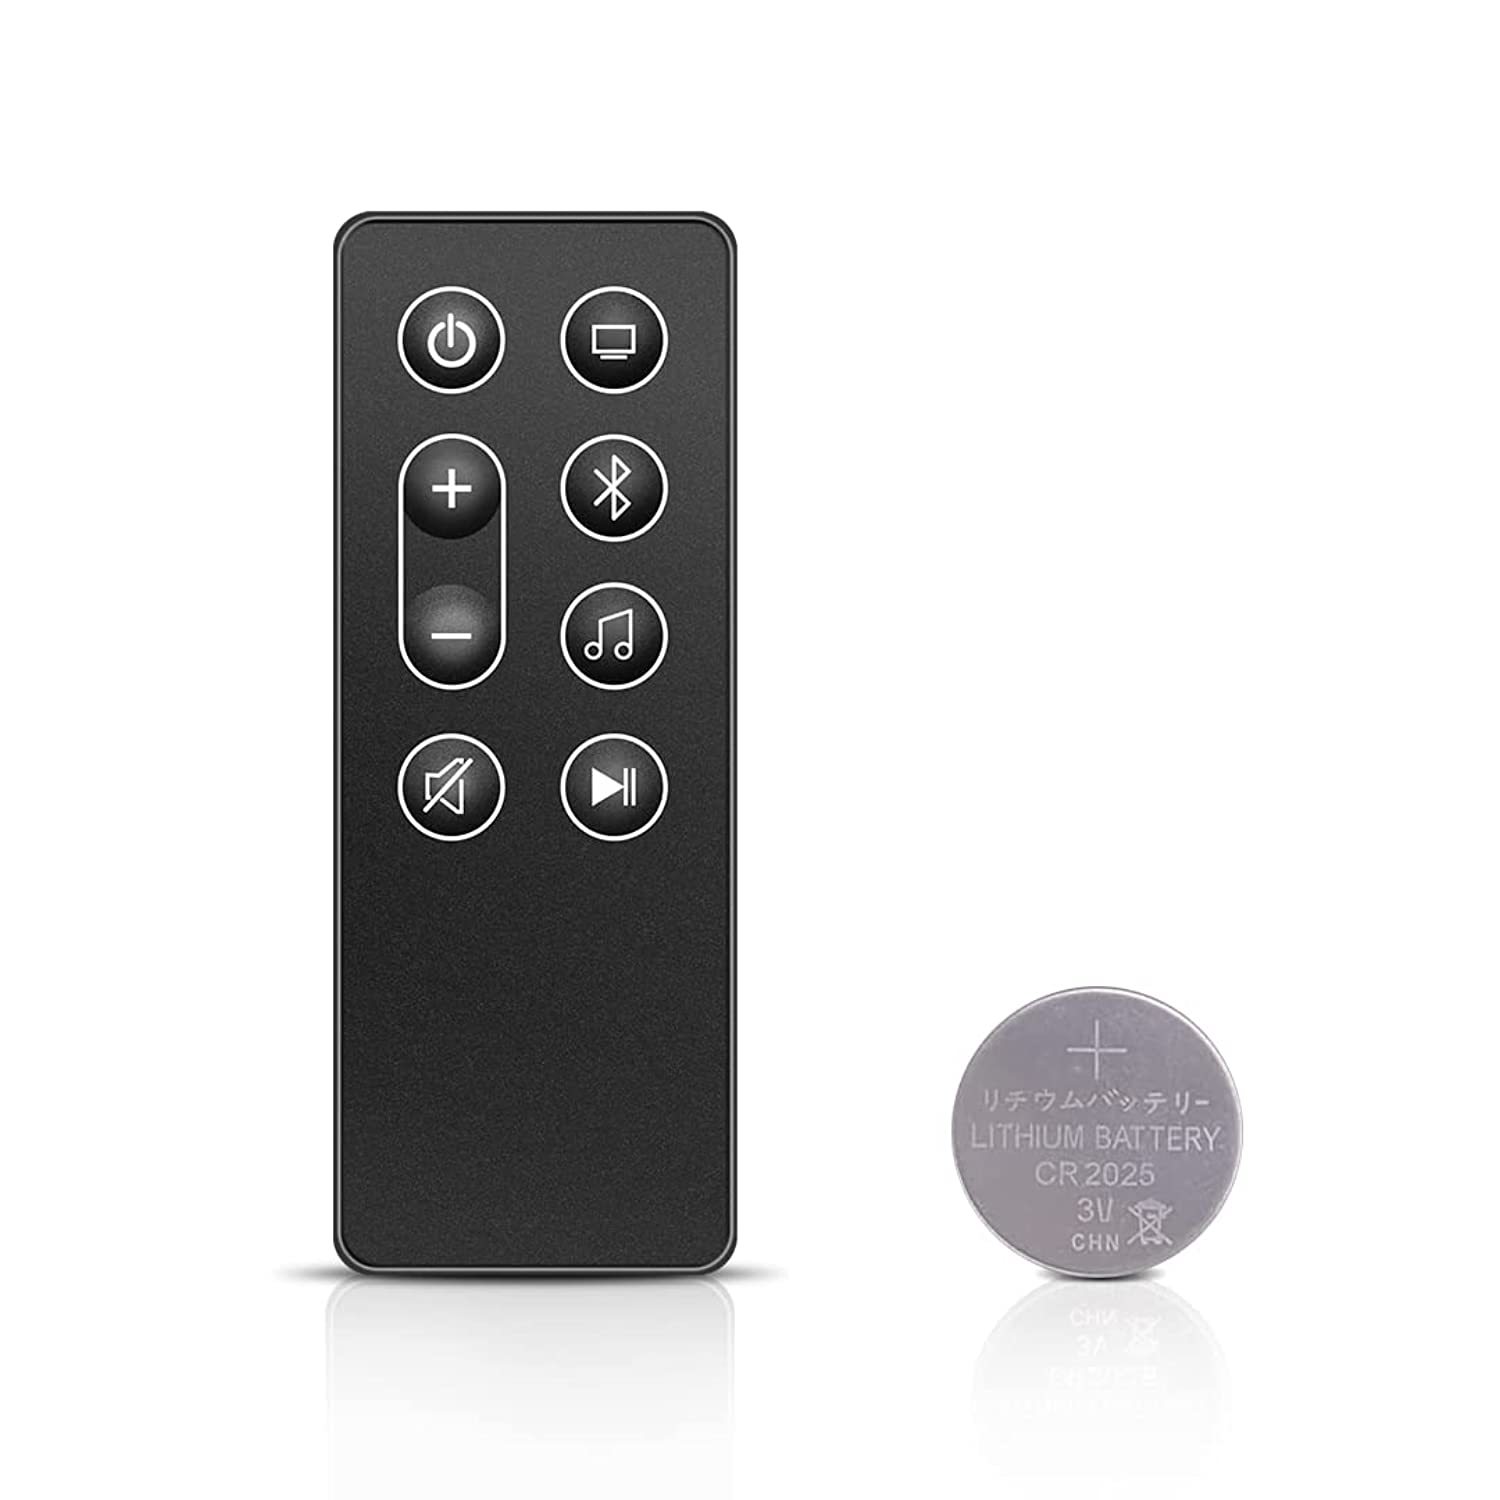 New Remote Control Replacement For Bose Smart Soundbar 300 - With Batt